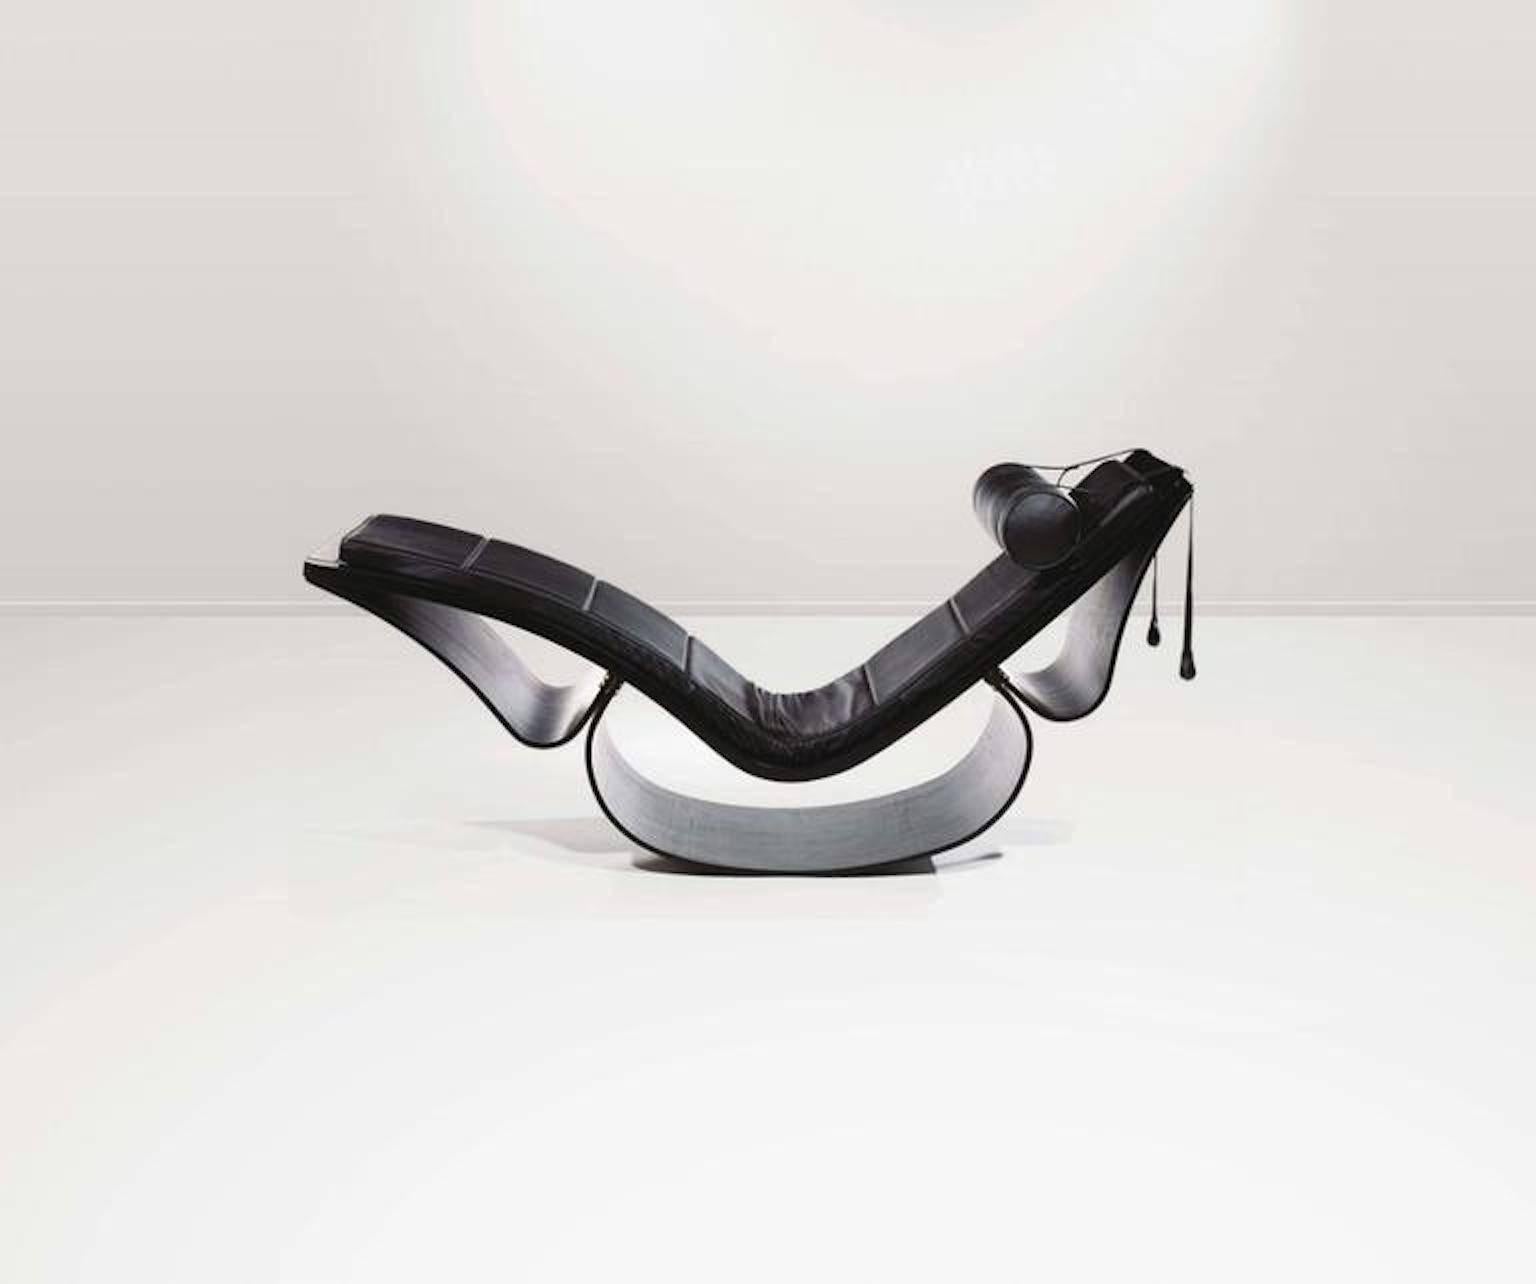 A sculptural rocking Rio chaise longue, designed in 1978, contemporary edition. Base composed of three elements including supple ribbons of molded darkened ash laminate, cushions maintained by straps on the seat and backrest, mobile headrest, black